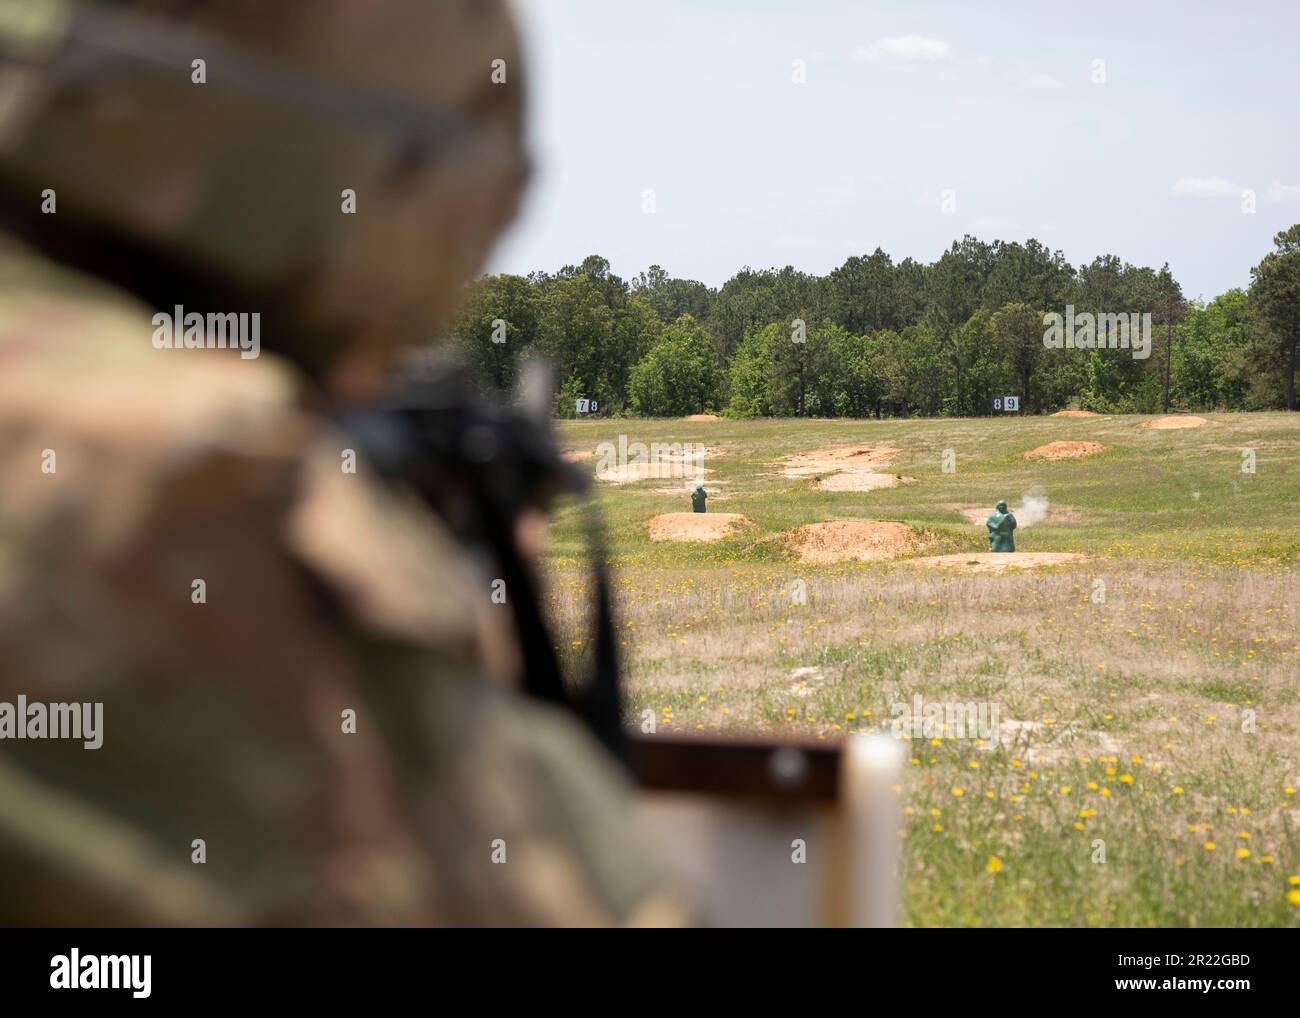 A U.S. Special Operations Soldier takes aim during an M4 qualification range while competing in the 8th Psychological Operations Group (Airborne) Best Squad Competition on May 9, 2023, on Fort Bragg, North Carolina. Soldiers were selected to challenge their physical endurance, tactical readiness, commitment to the Army Values, and unending resilience as they aspire to contend for the U.S. Army Best Squad Competition. (U.S. Army photo by Sgt. 1st Class Venessa Hernandez) Stock Photo